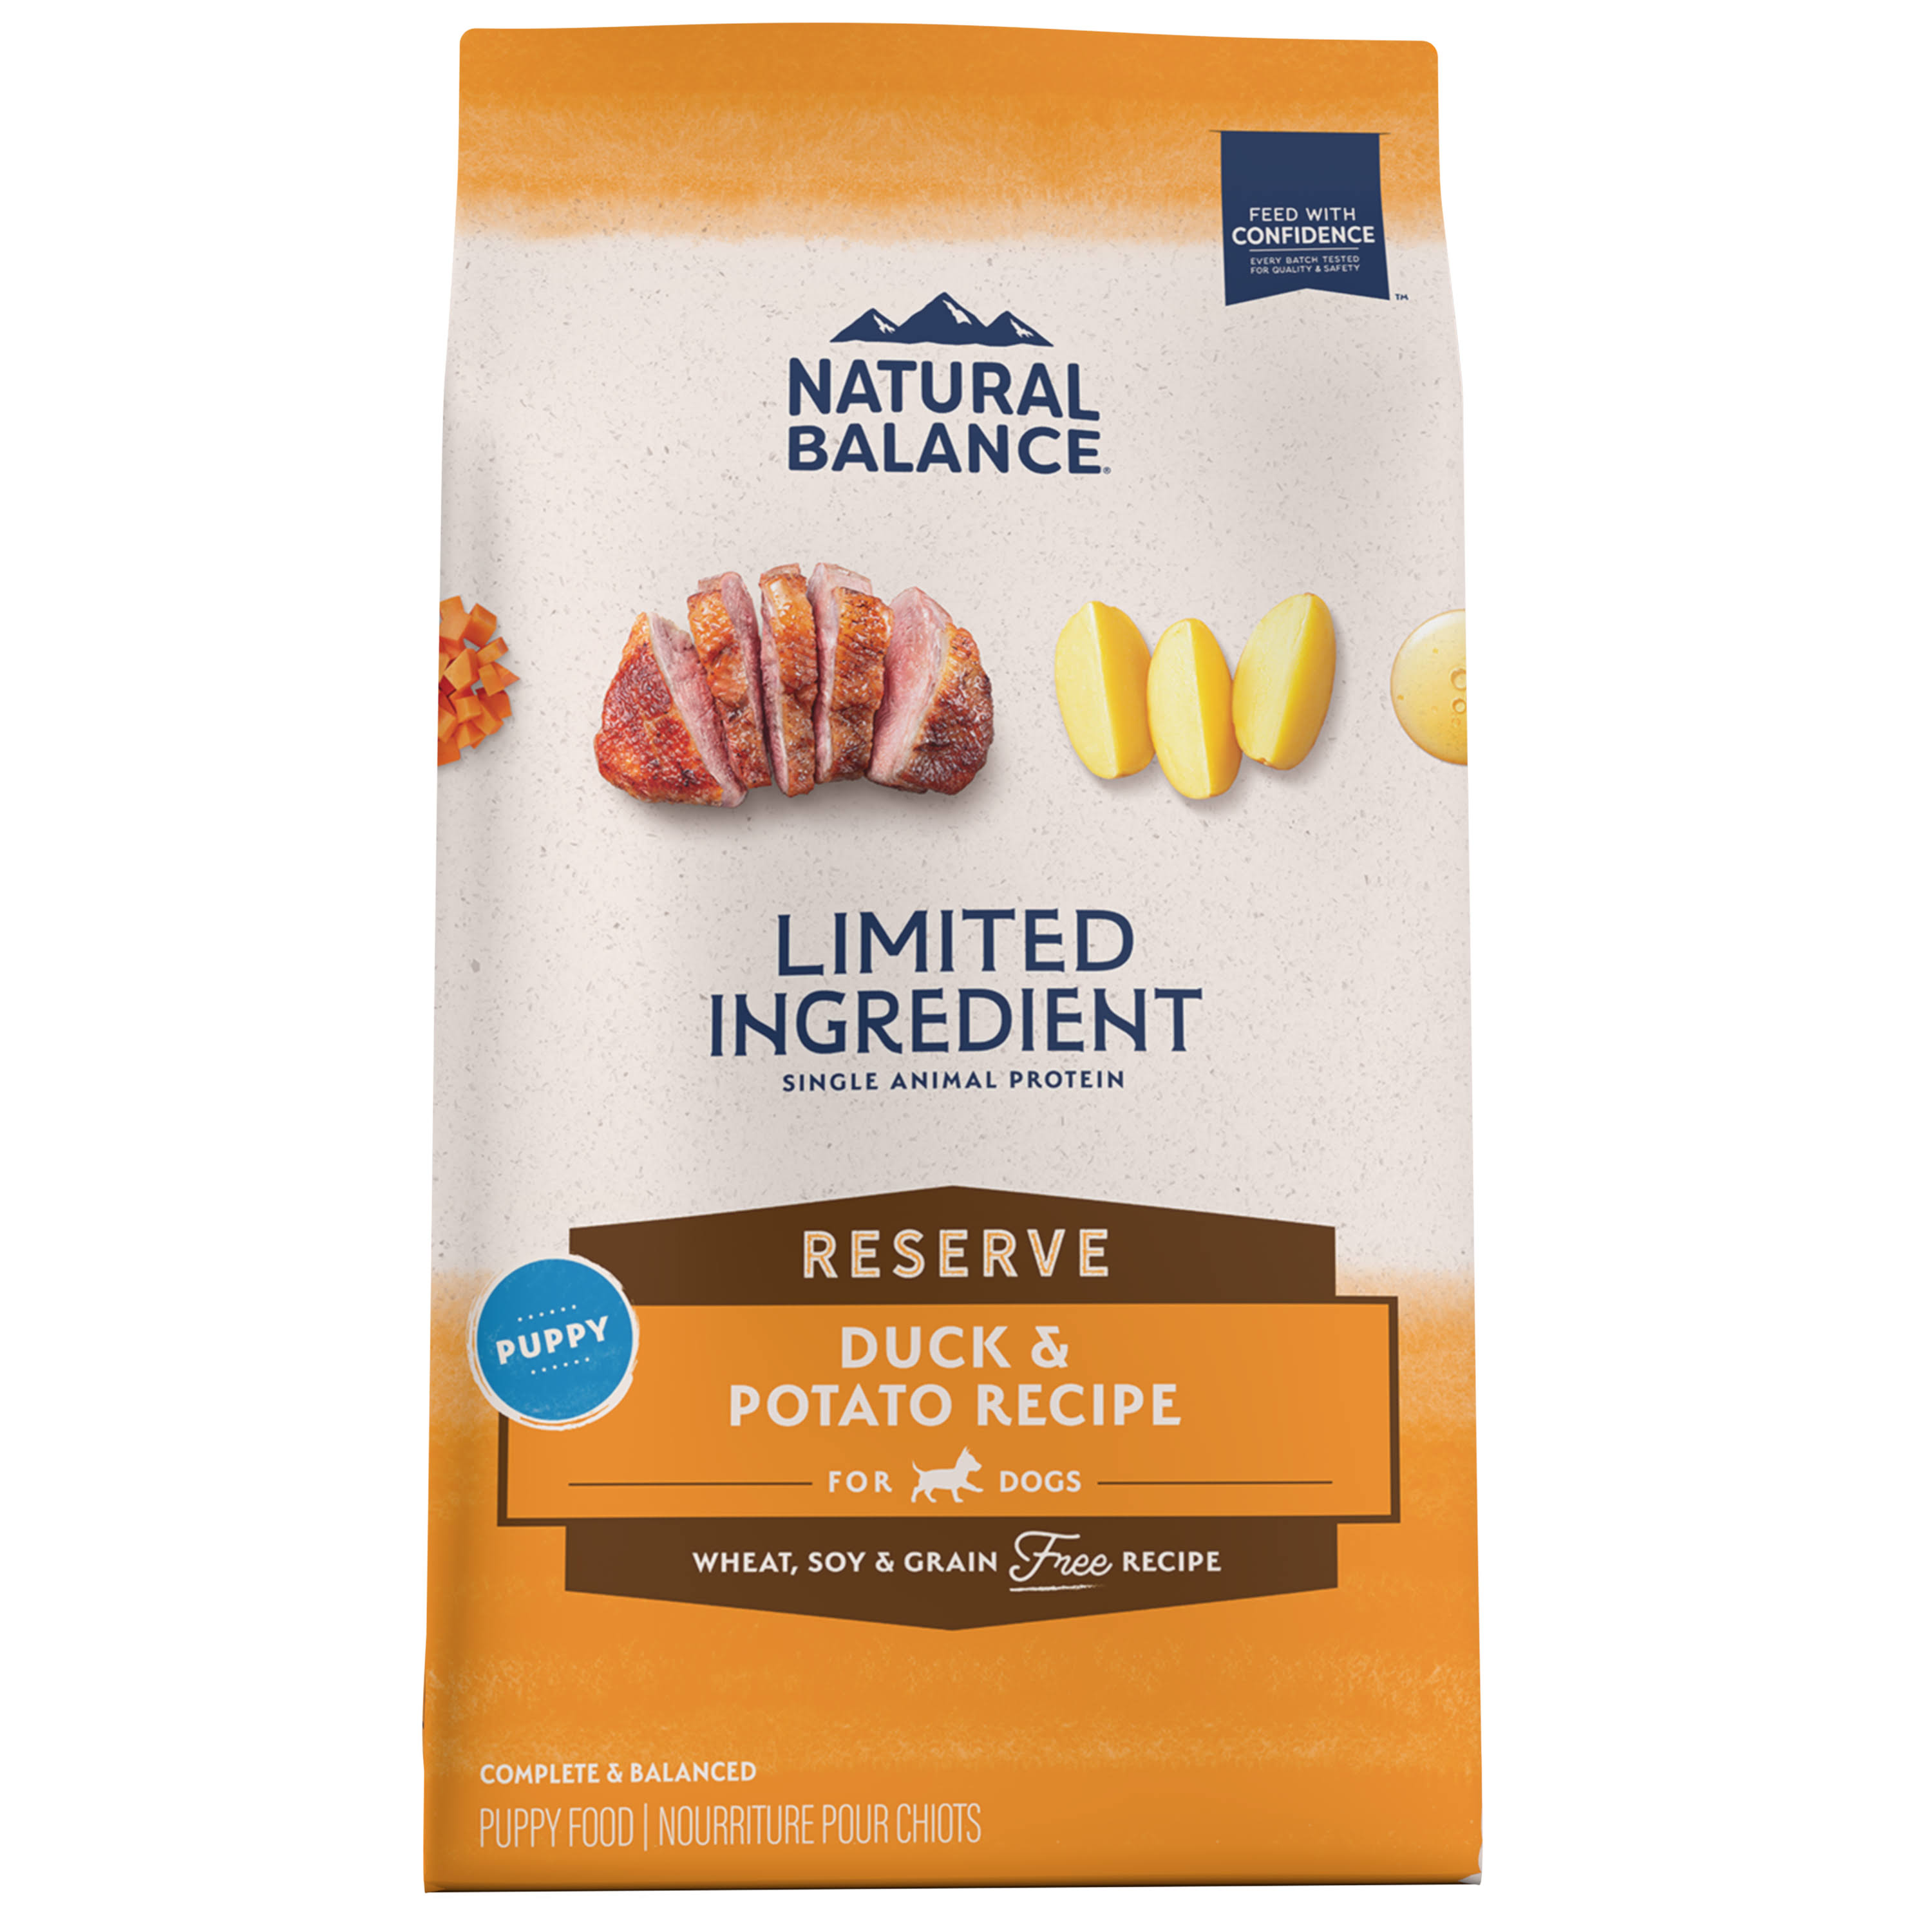 Natural Balance Limited Ingredient Diets Puppy Dry Dog Food - Duck and Potato, size: 4 lbs | PetSmart